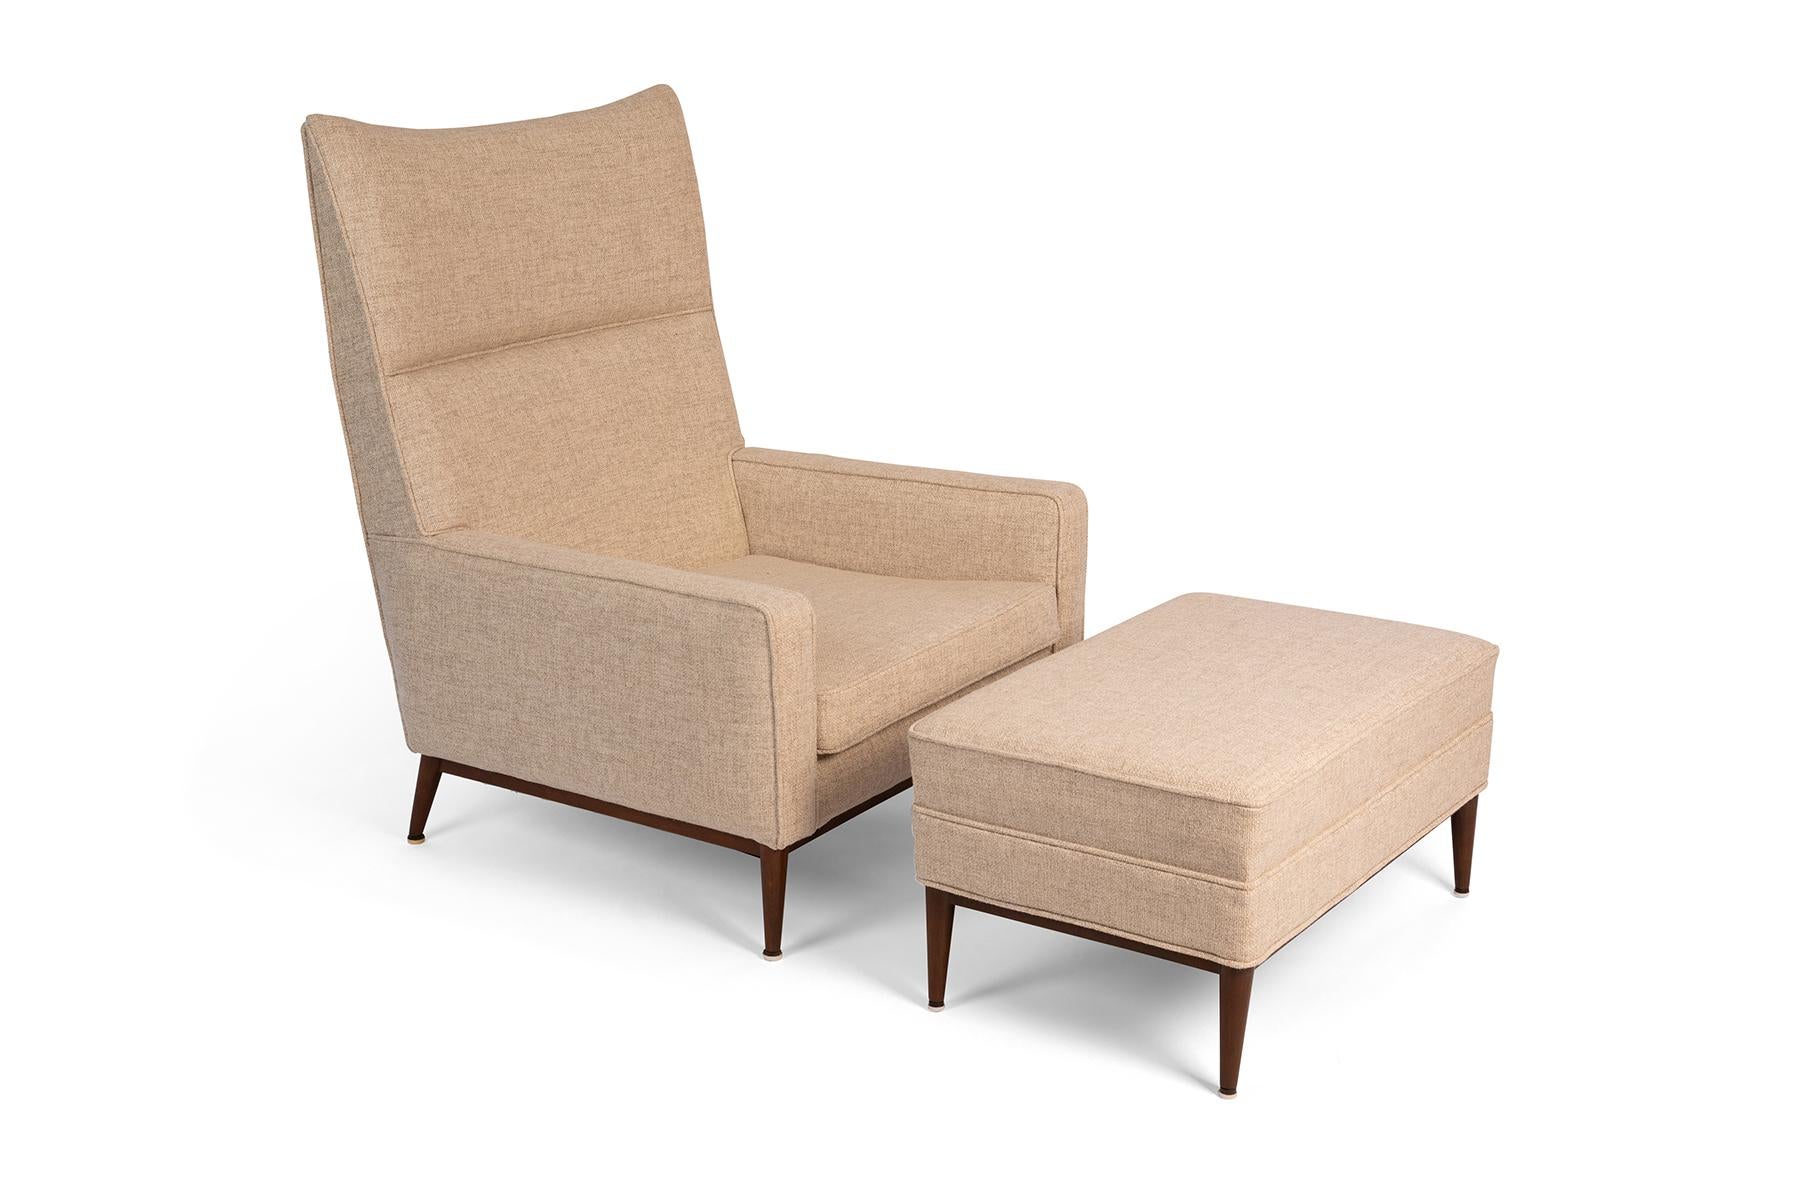 Paul McCobb 314 lounge chair with accompanying ottoman in an off-white Holly Hunt wool accented with newly finished solid walnut legs. Ottoman measures 29.5 x 19 inches.